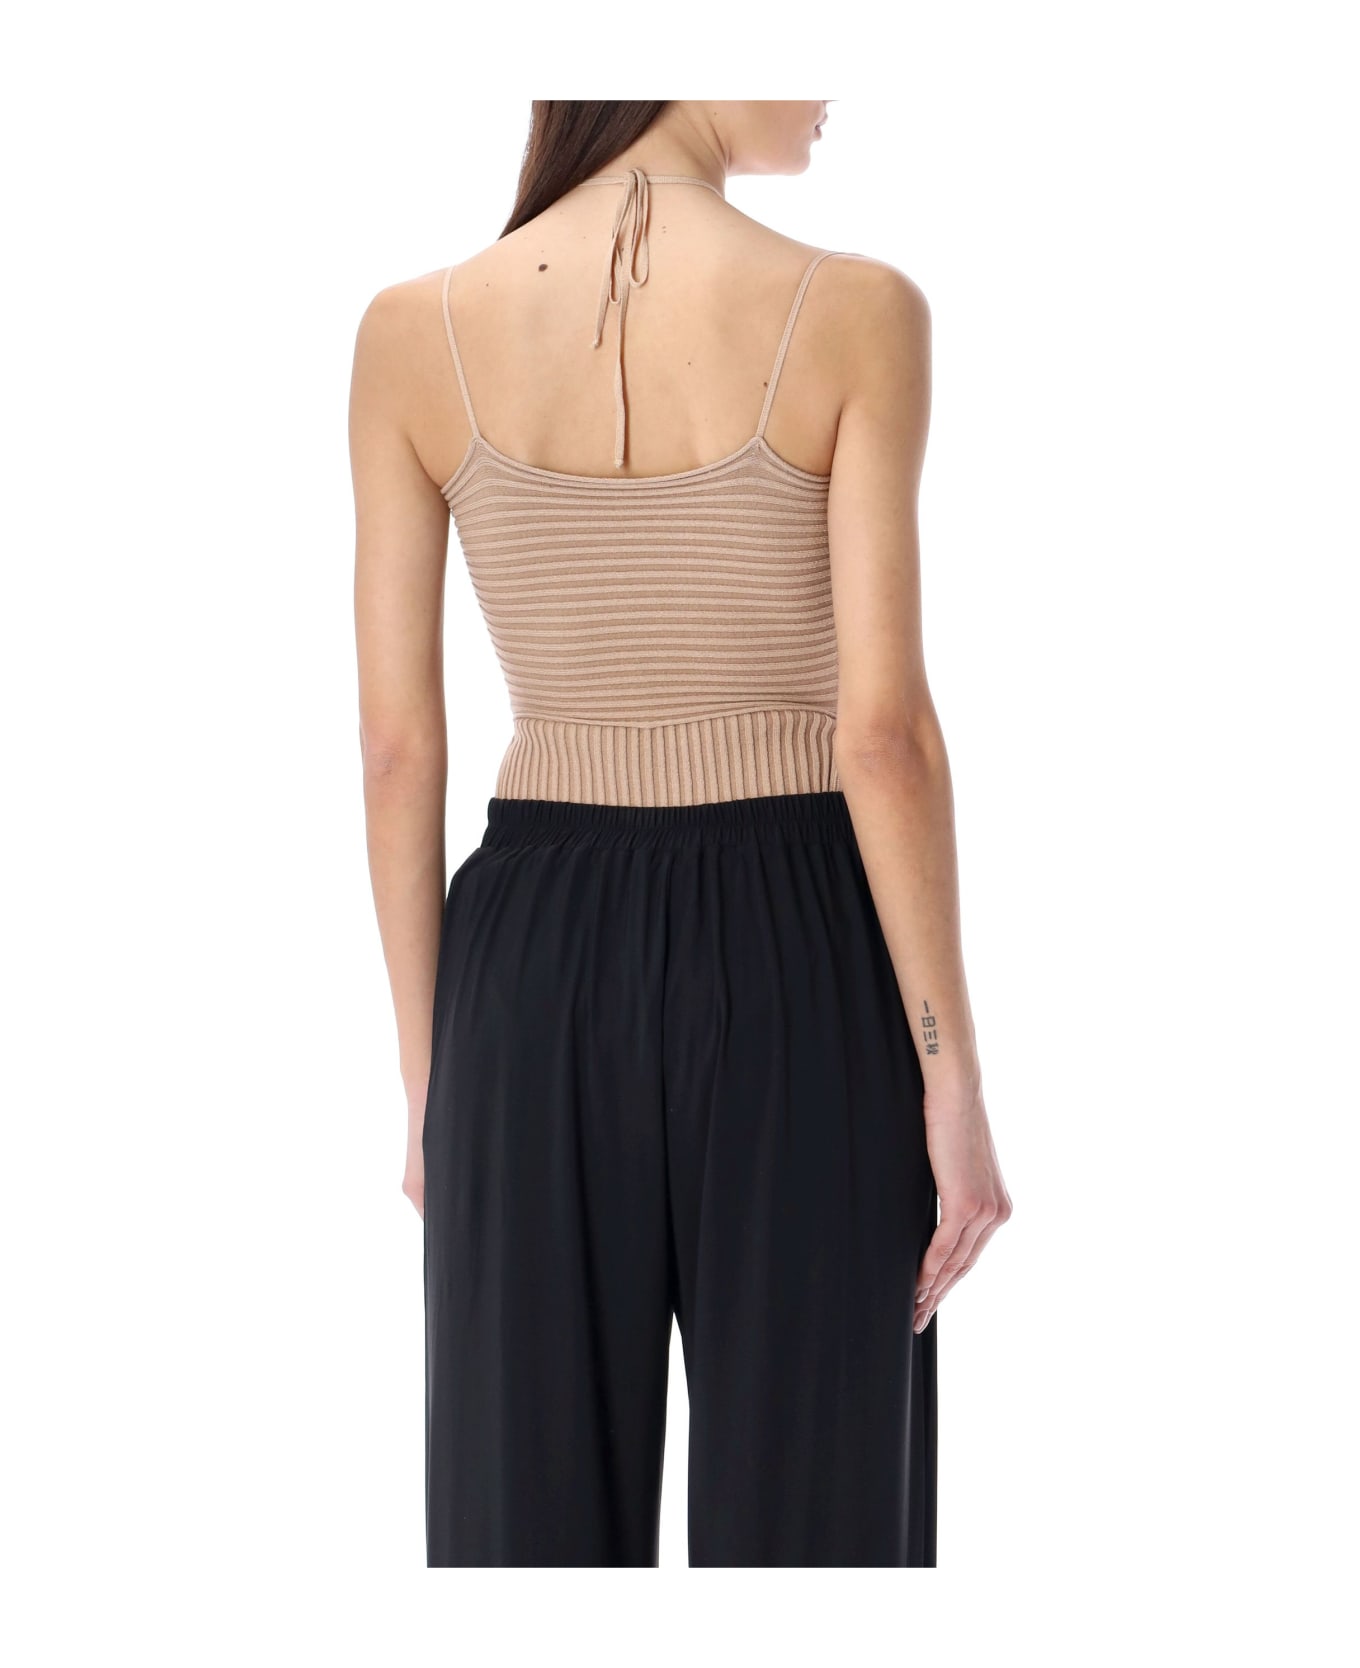 ANDREĀDAMO Ribbed Knit Sleeveless Bodysuit With Cut - NUDE